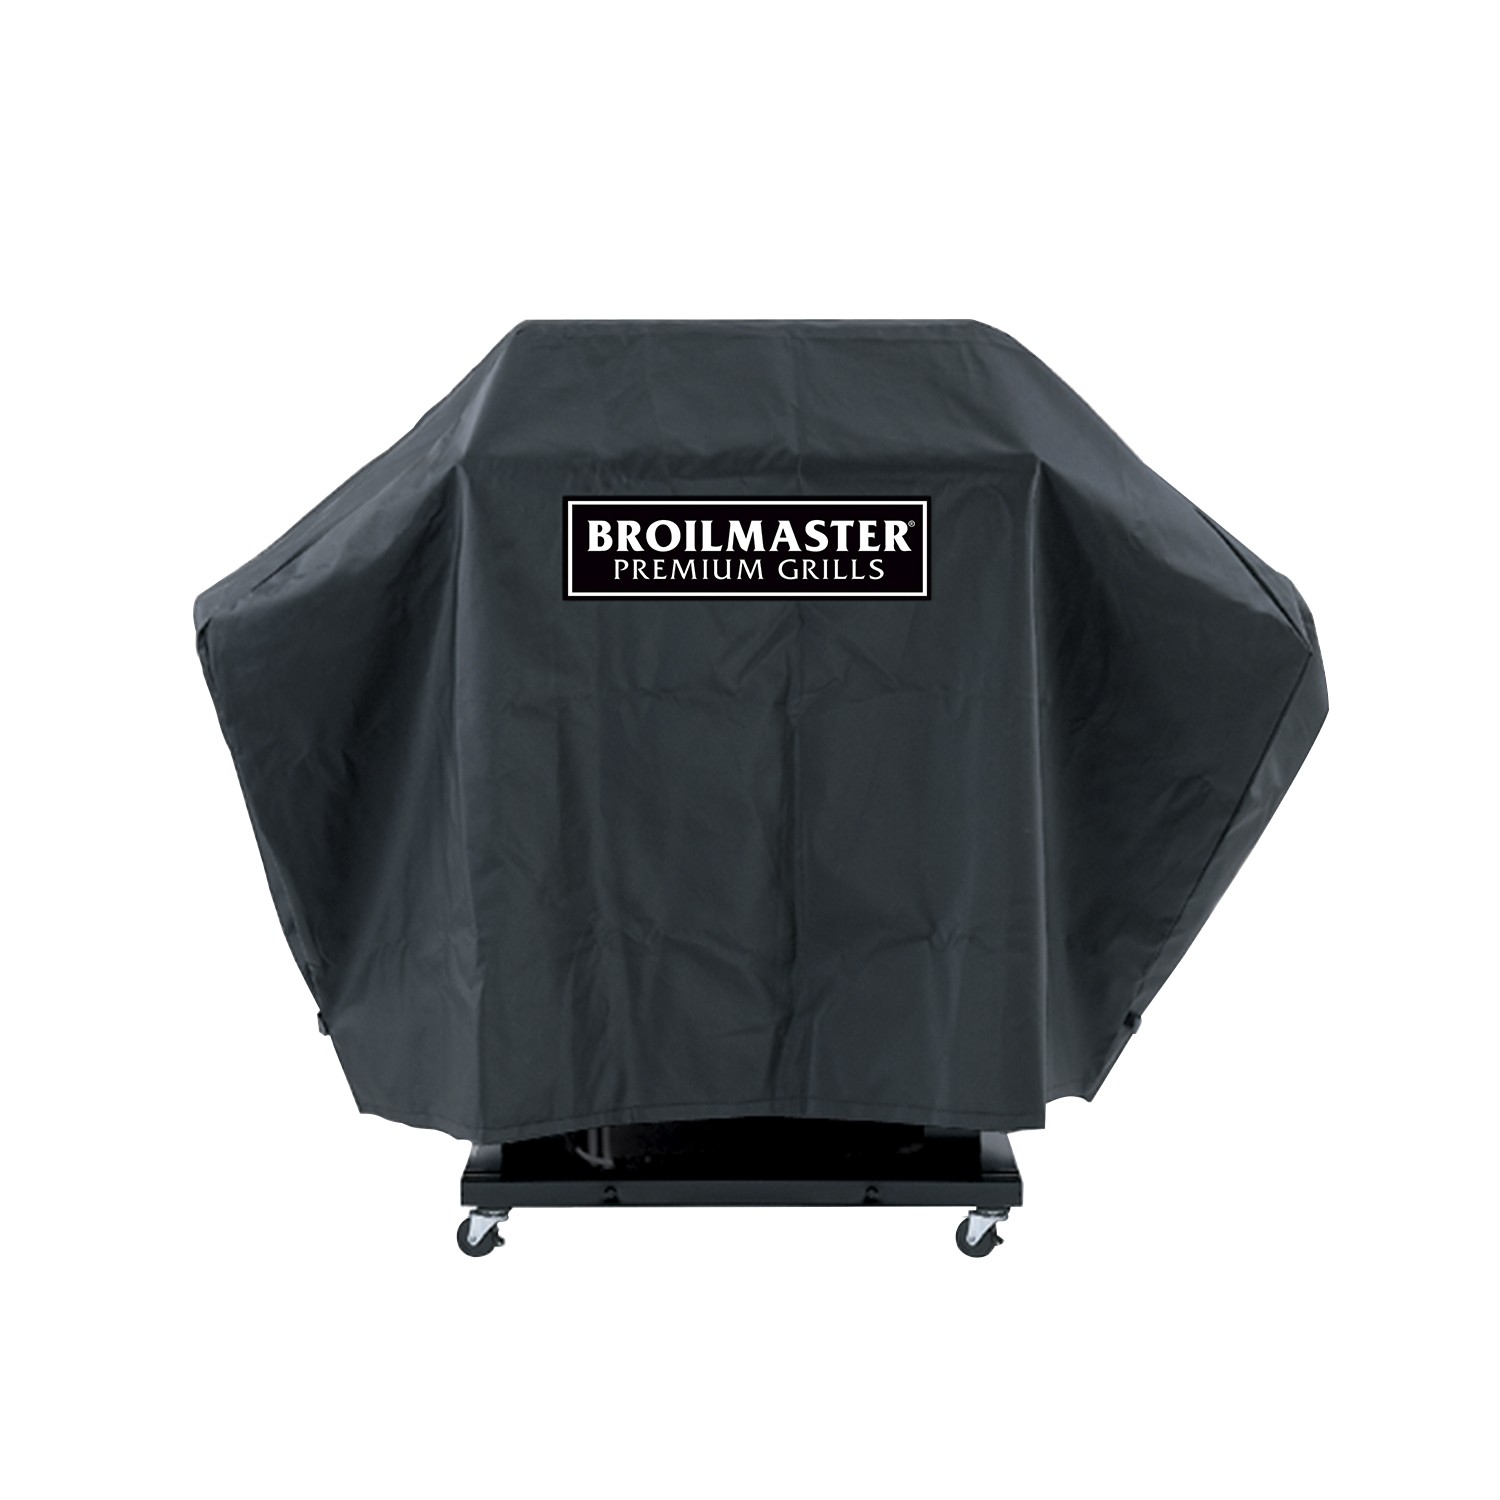 BROILMASTER DPA8 FULL LENGTH COVER FOR BROILMASTER GRILL WITHOUT SIDE SHELVES - BLACK